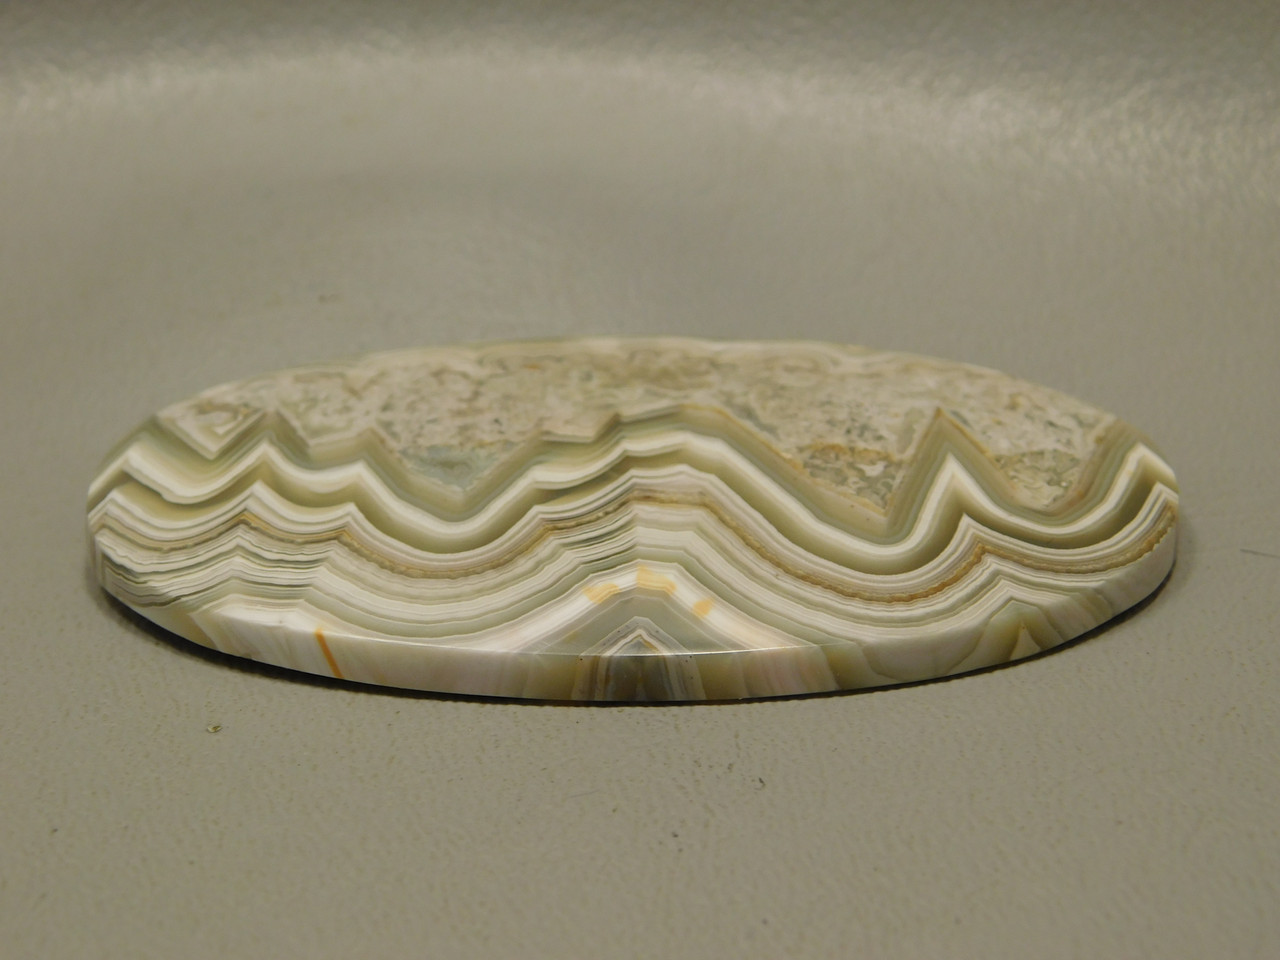 Crazy Lace Agate High Grade Stone Large Oval Collector Cabochon #xl3